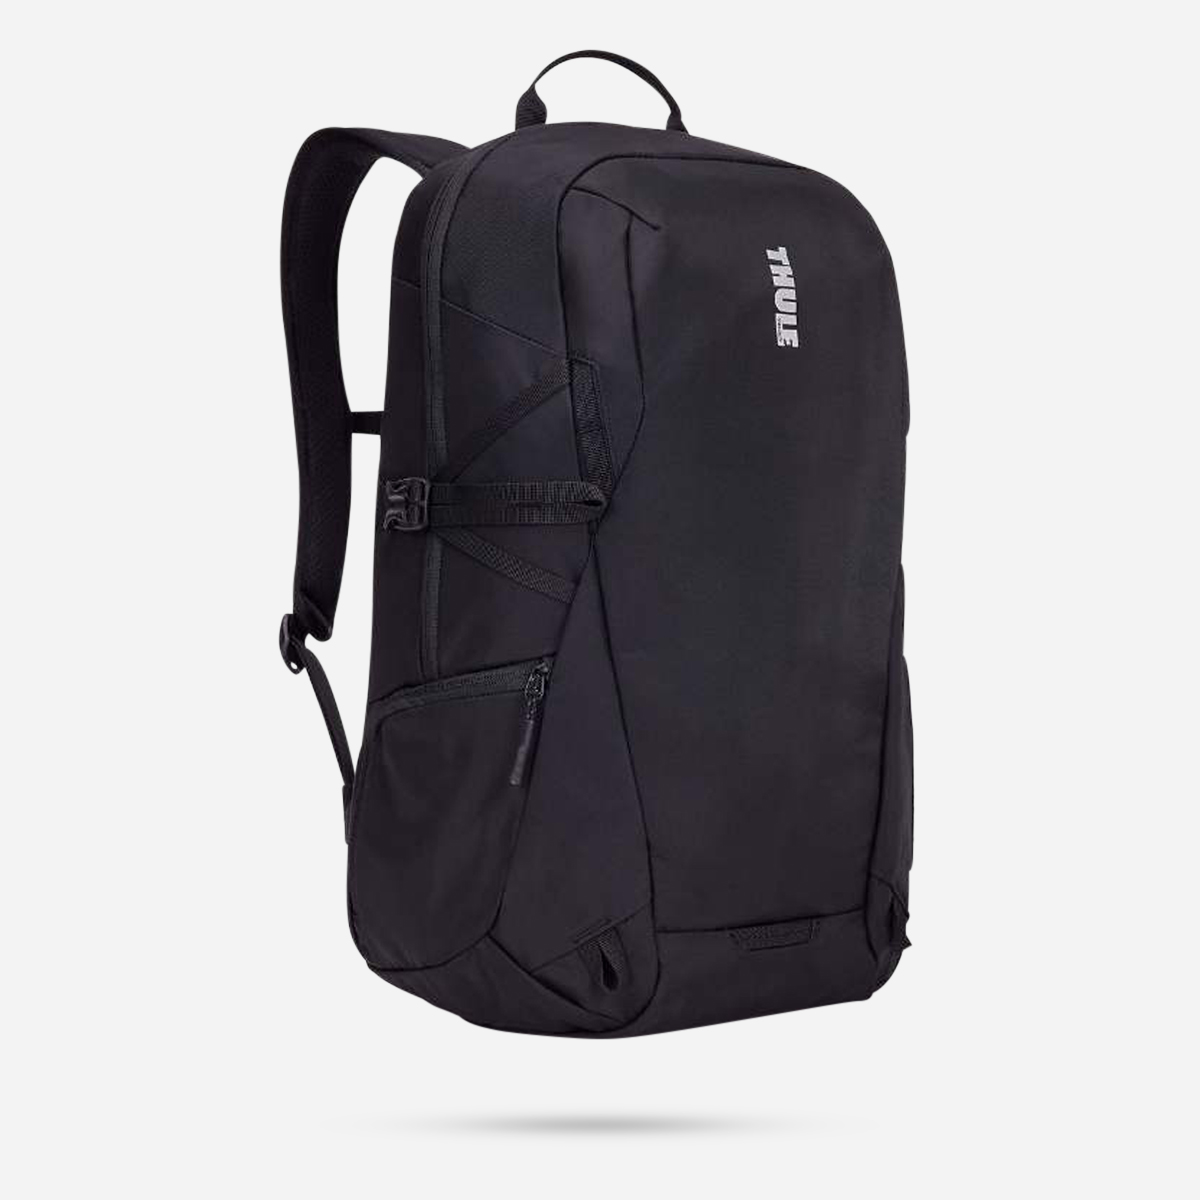 AN292346 EnRoute Backpack 21L